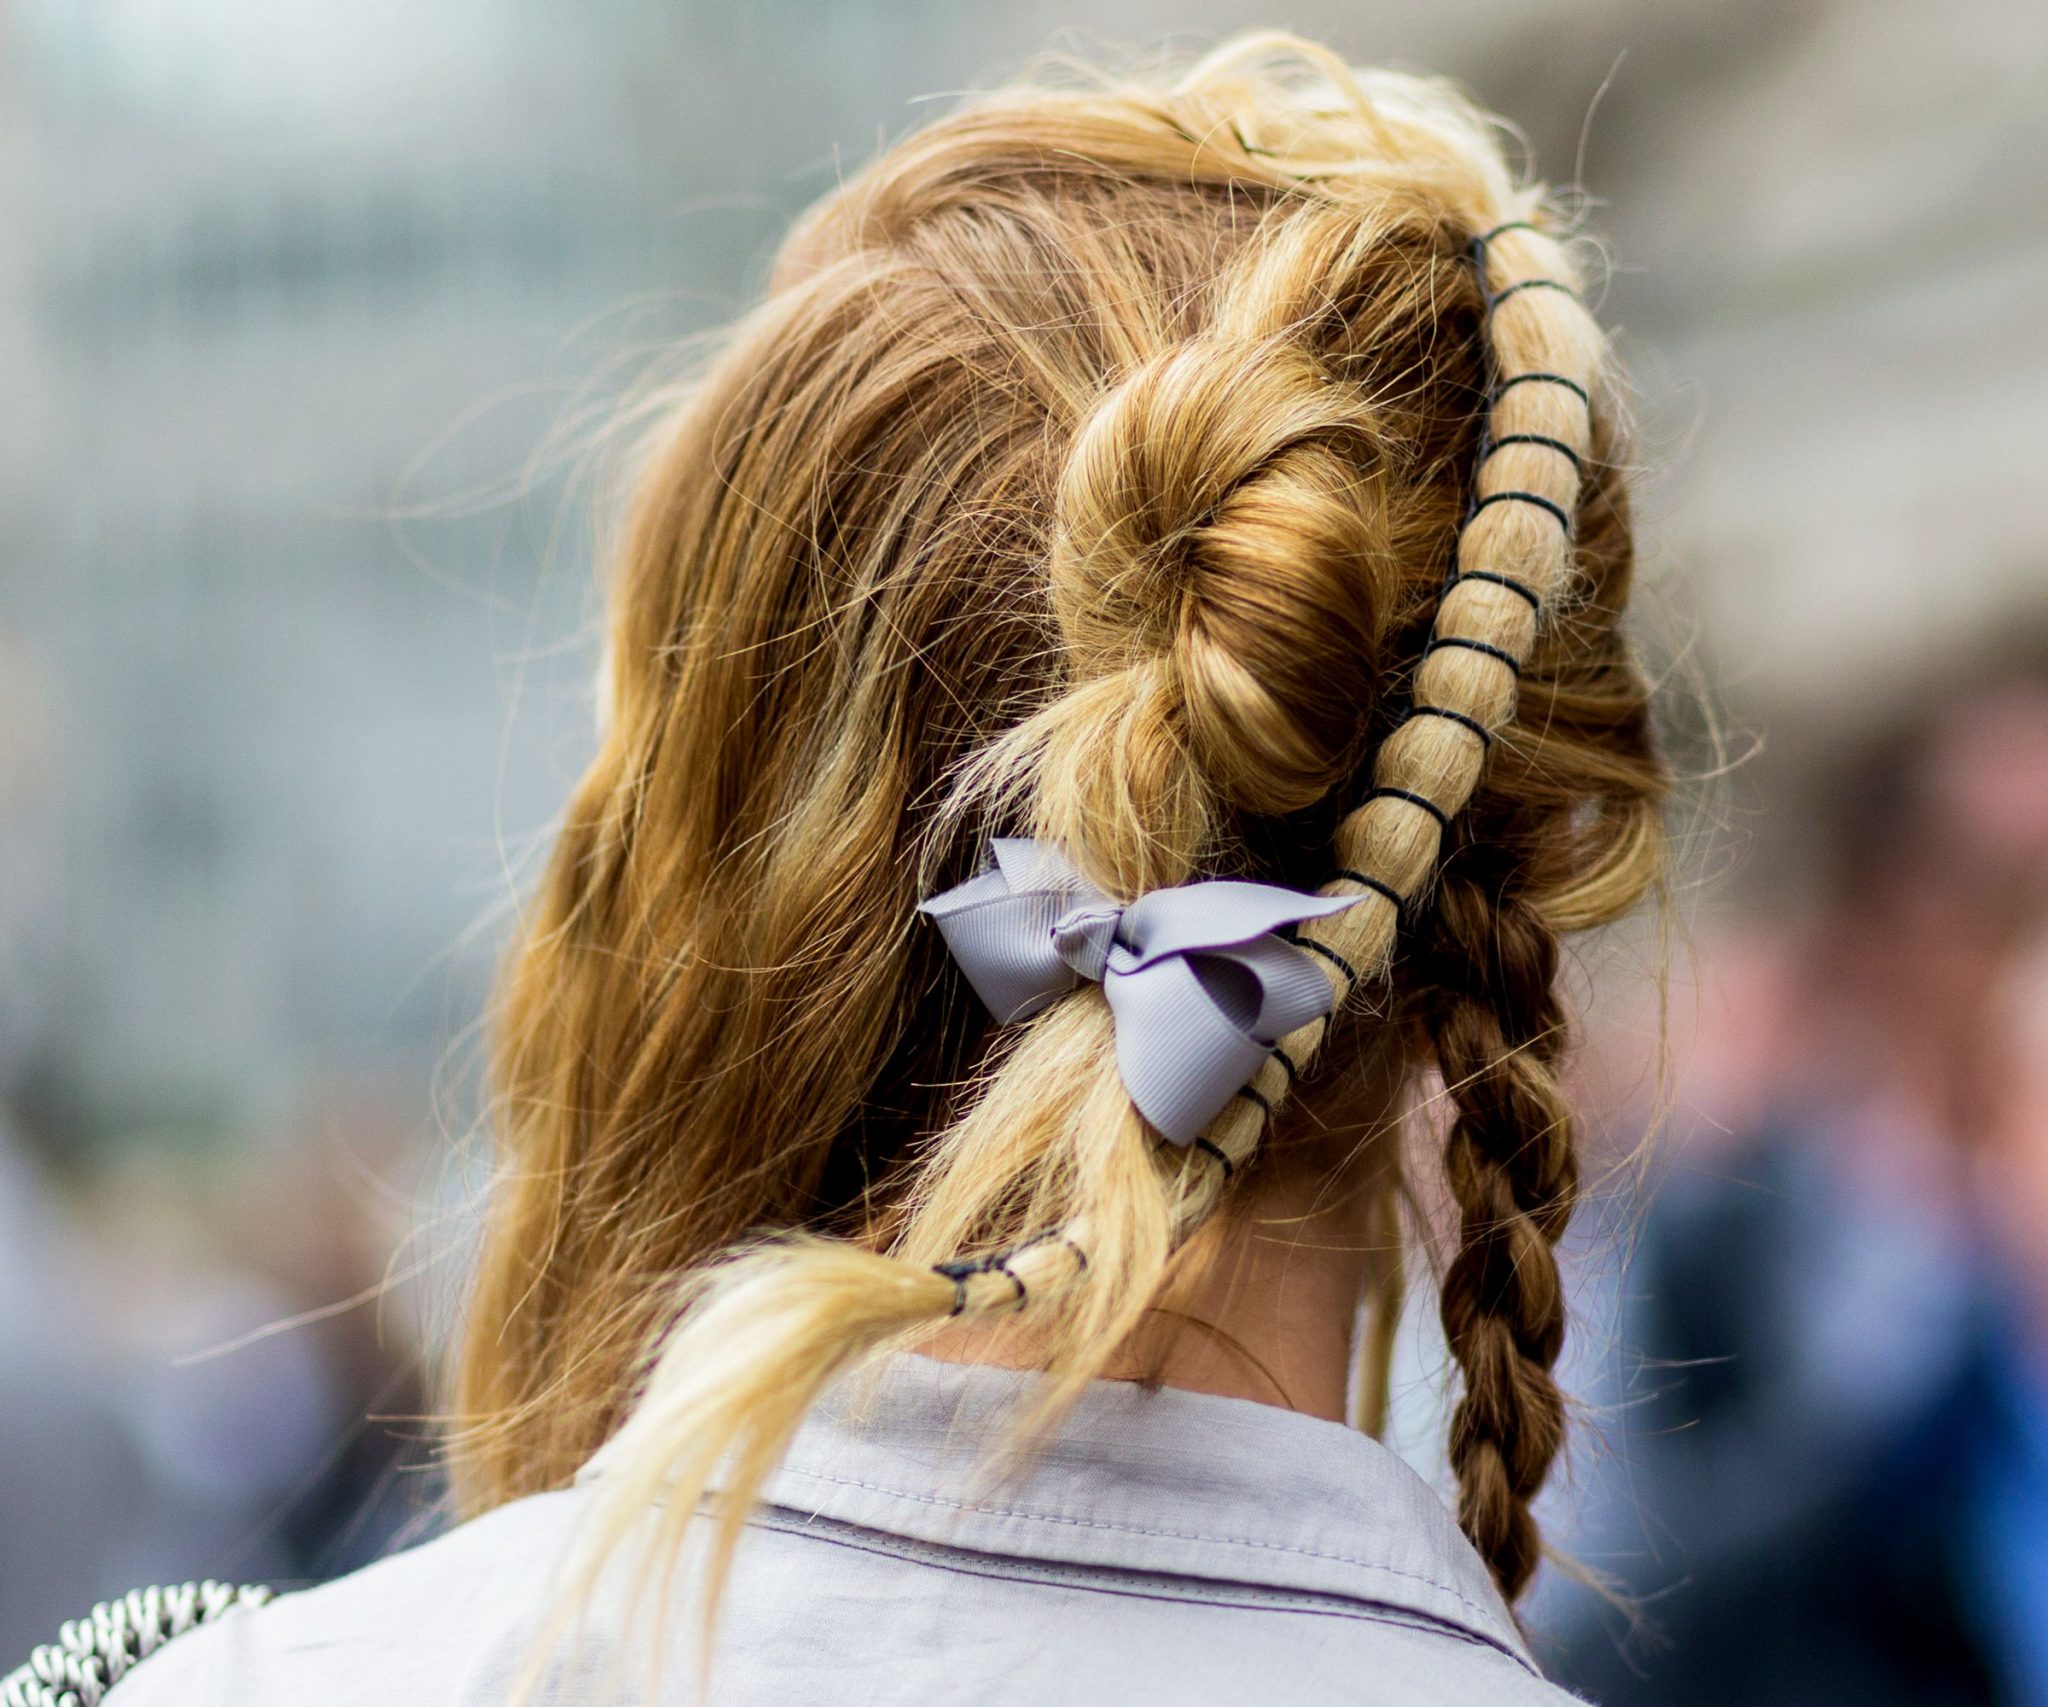 hair bows are back & hollywood can’t get enough of the trend